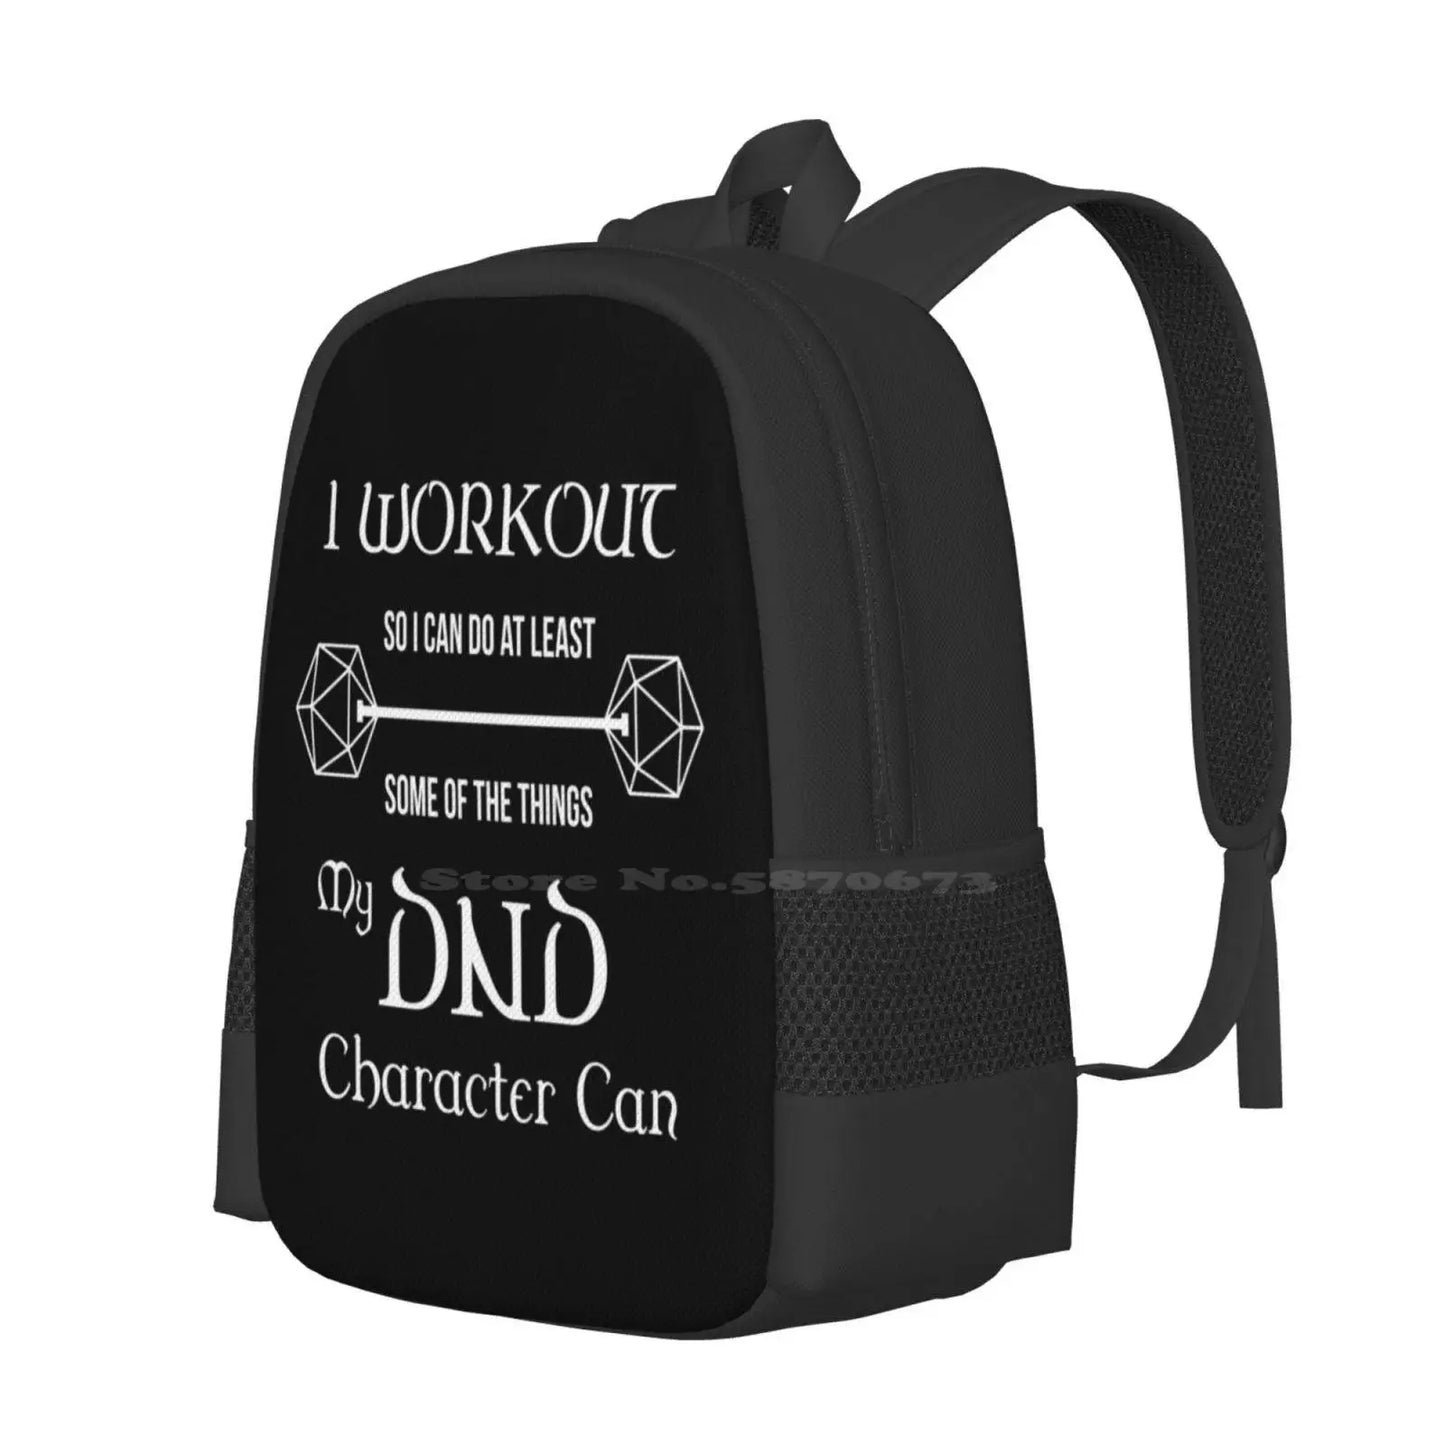 Dnd Character Workout - In White Backpack For Student School Laptop Travel Bag And Dragons Gym Workout Roleplaying Rpg Dnd D20